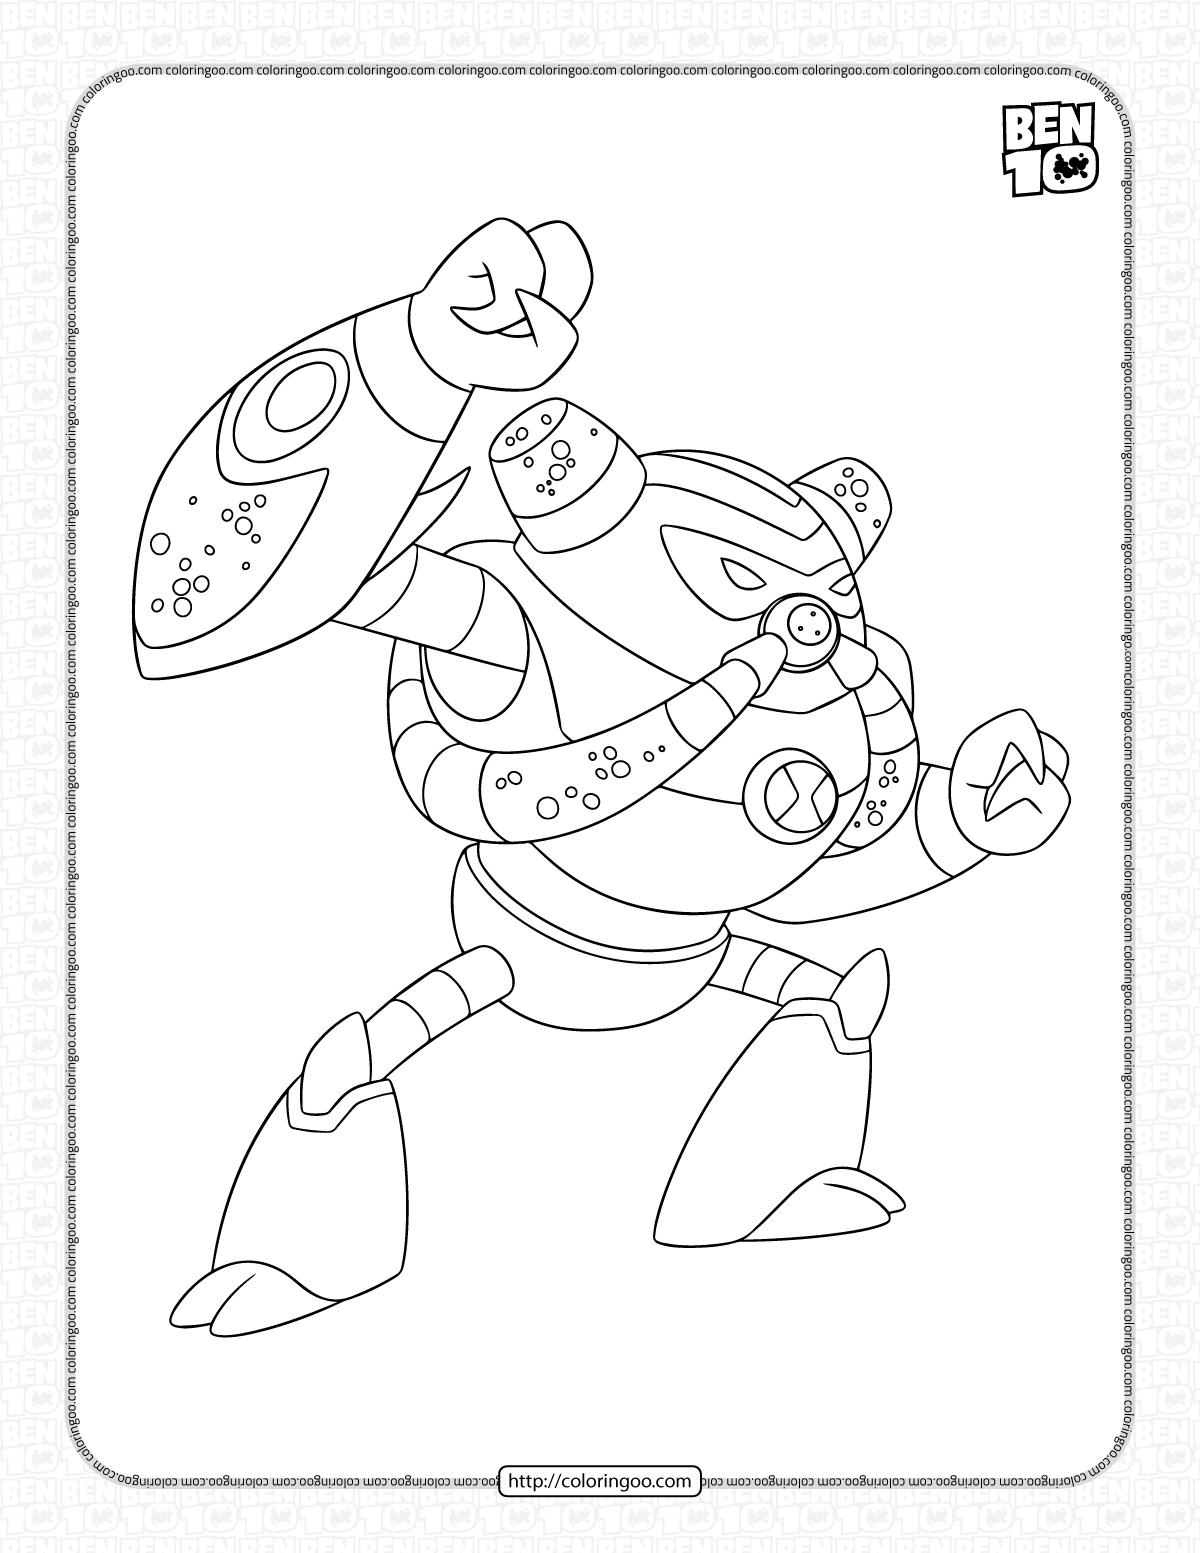 ben 10 overflow coloring pages for kids